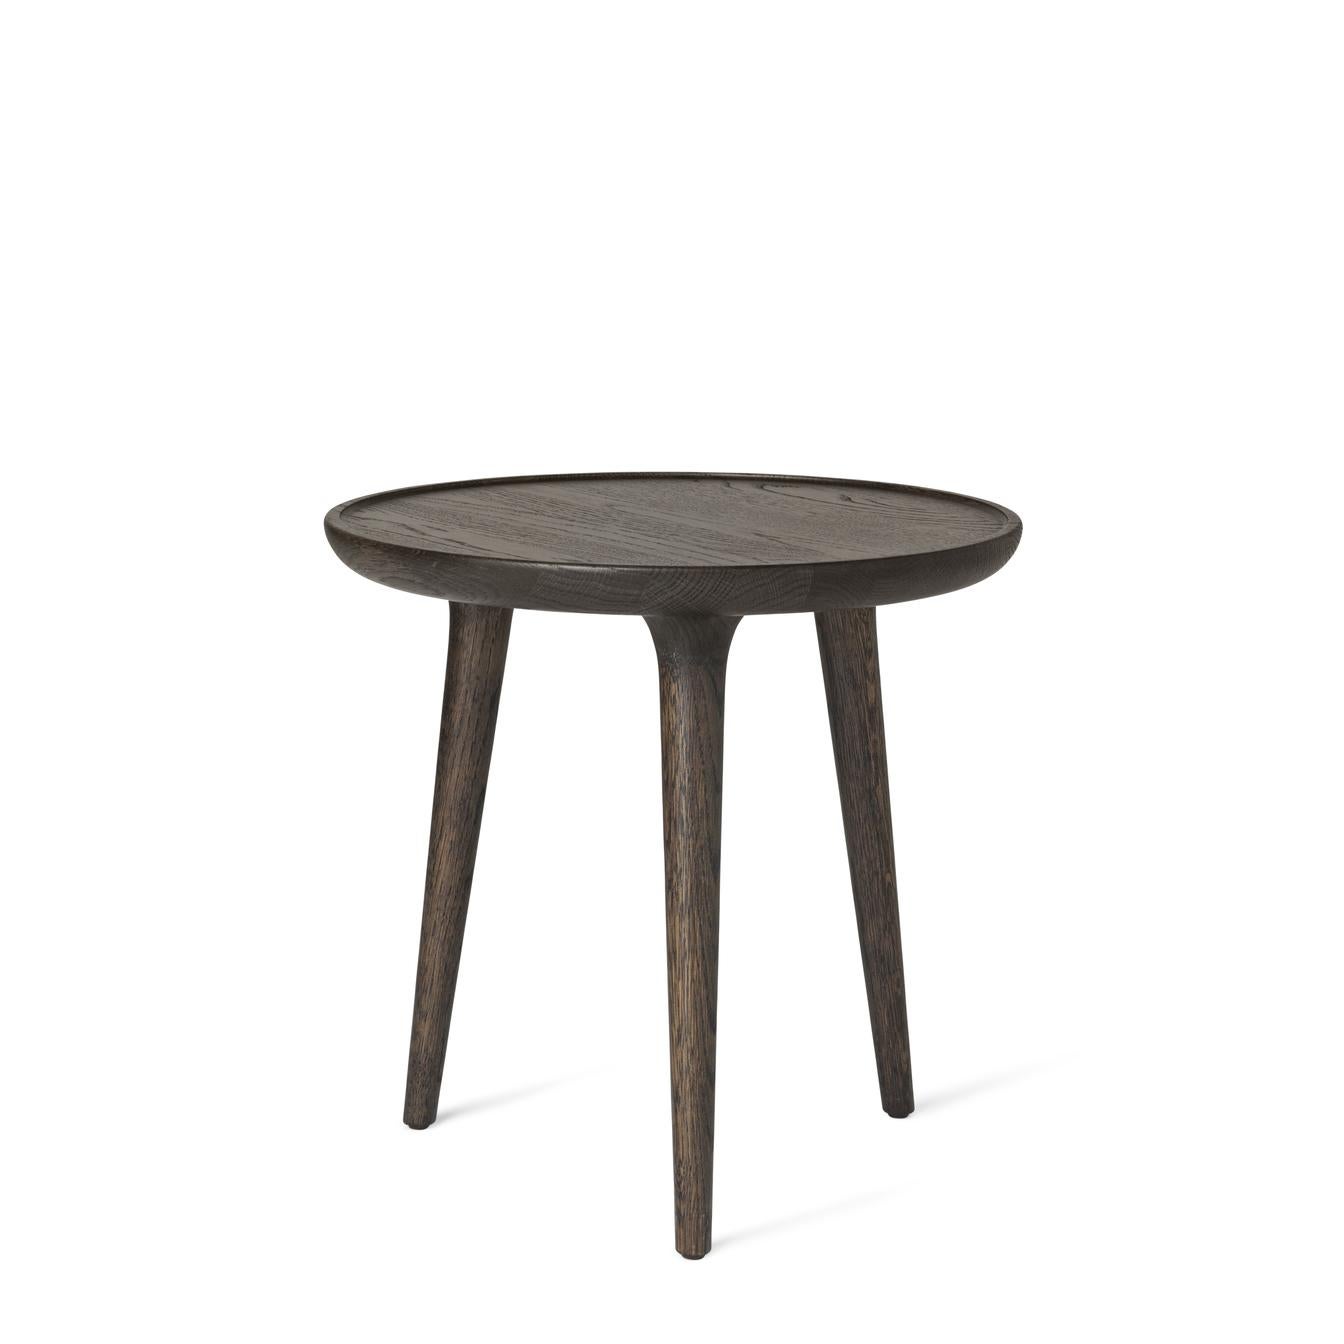 The Mater Accent Table is designed by the Danish architect duo Space Copenhagen and combines a sculptural and handcrafted aesthetic. Following along the same bloodline as the highly successful 2009 Mater High Stool, the Accent collection consists of